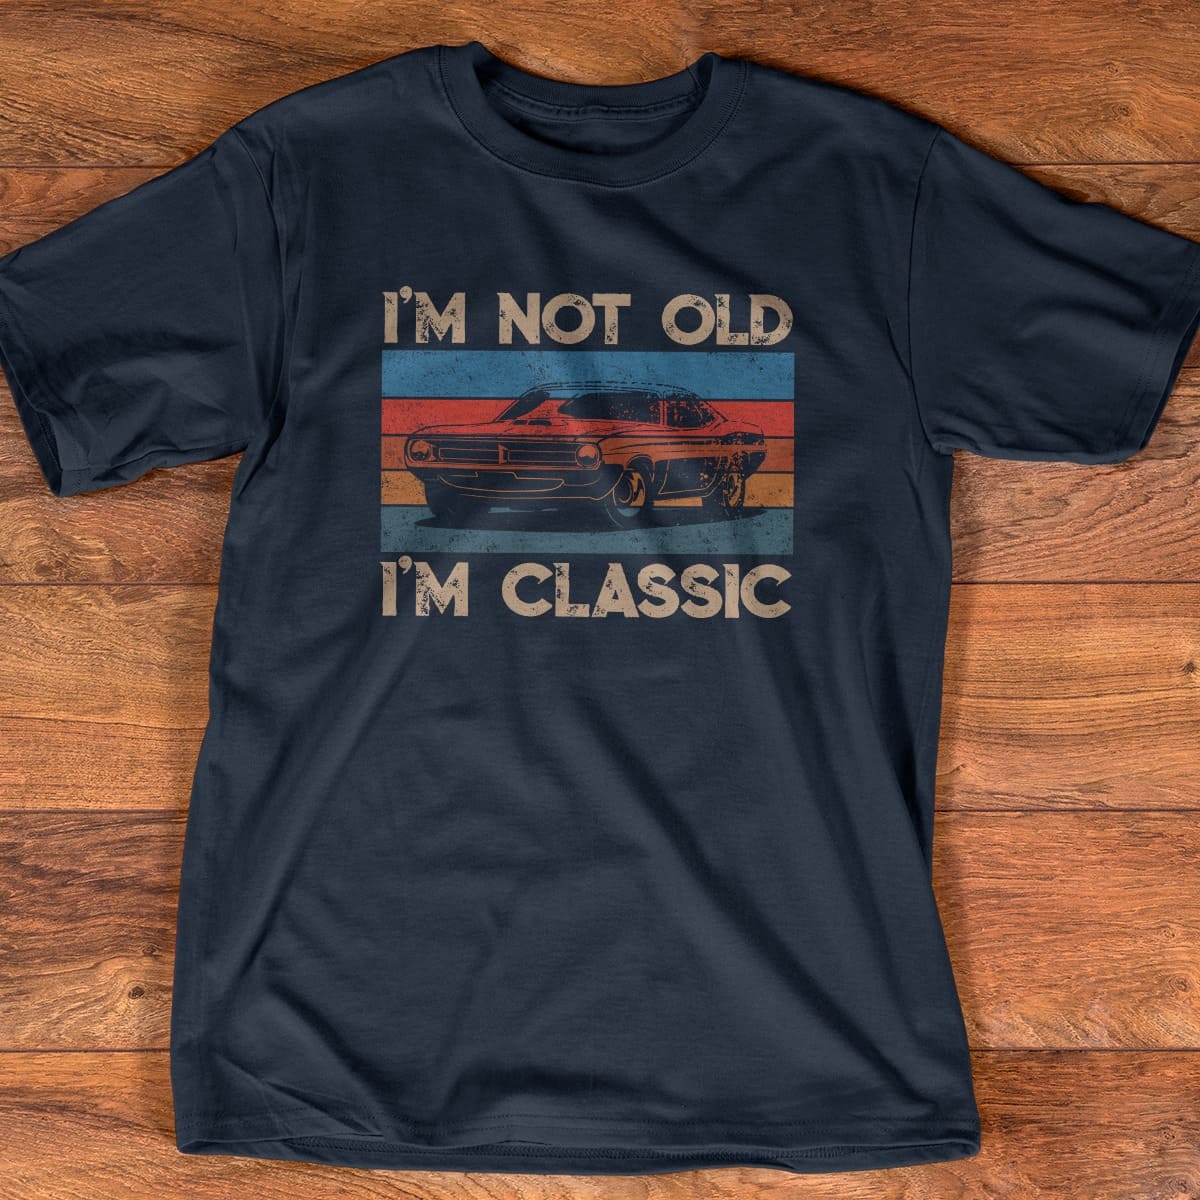 I'm not old I'm classic - Classic car graphic T-shirt, gift for car collector